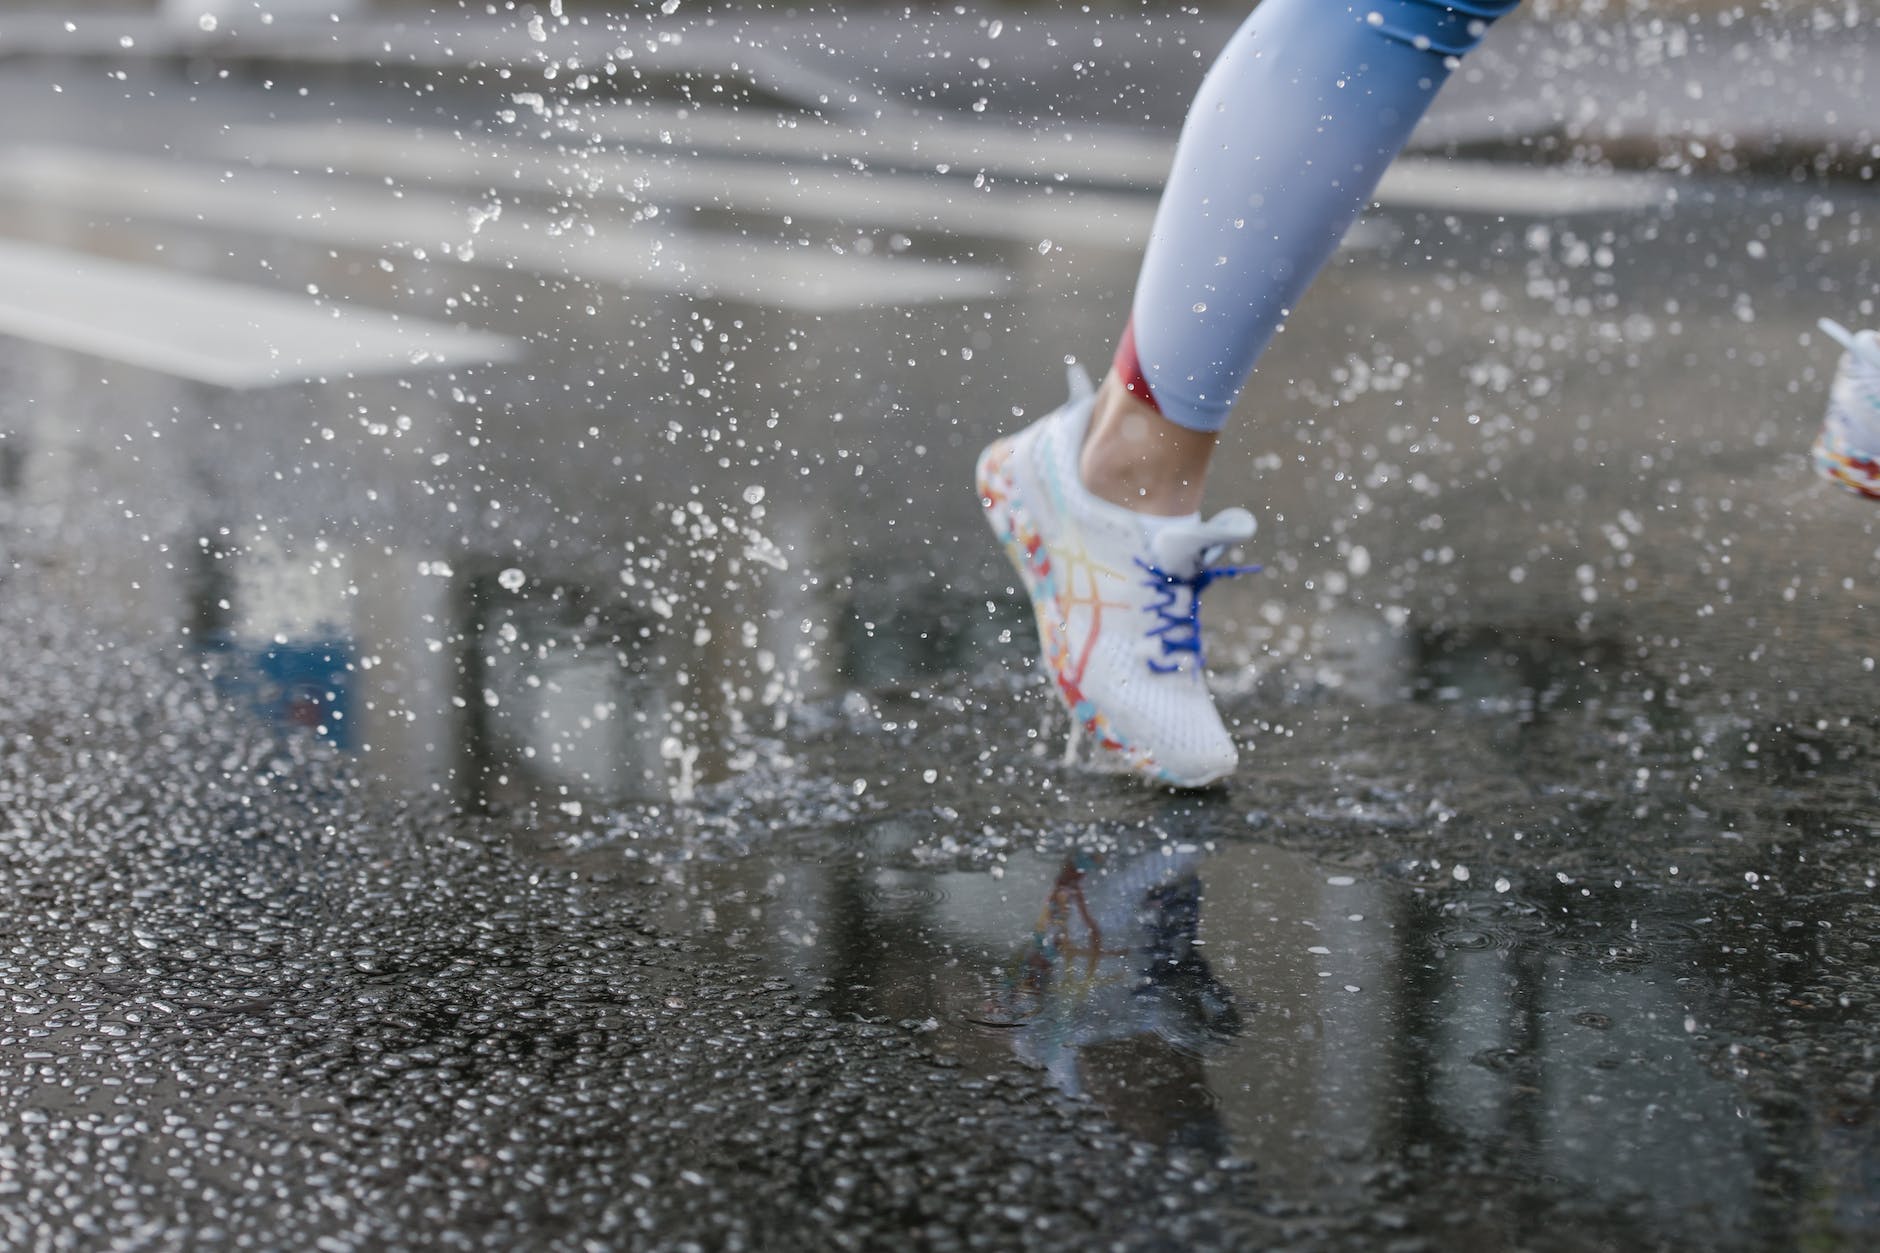 A close up of a shoe of a person running on a wet road.